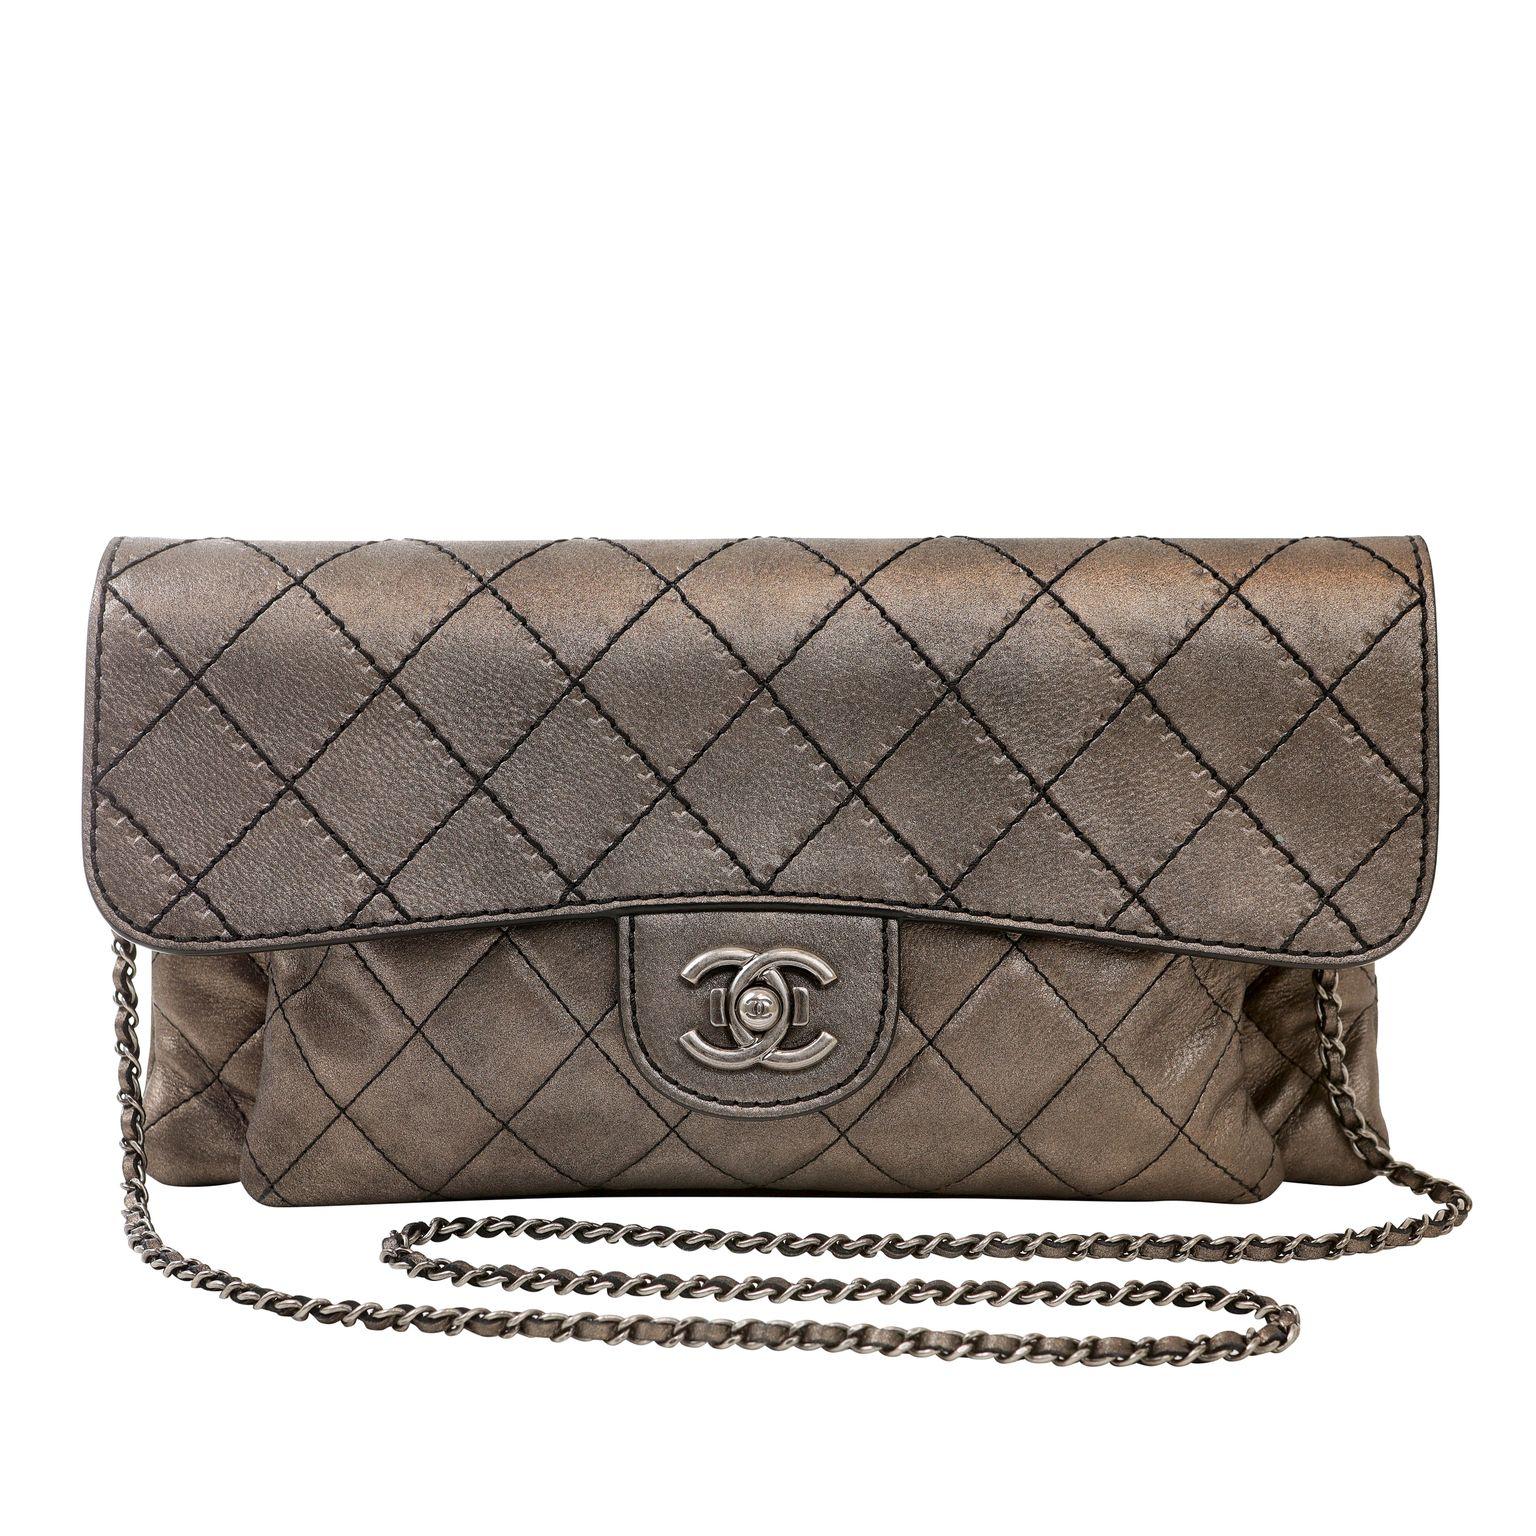 Gray Chanel Metallic Copper Lambskin Small Crossbody Flap Bag with Ruthenium Hardware For Sale